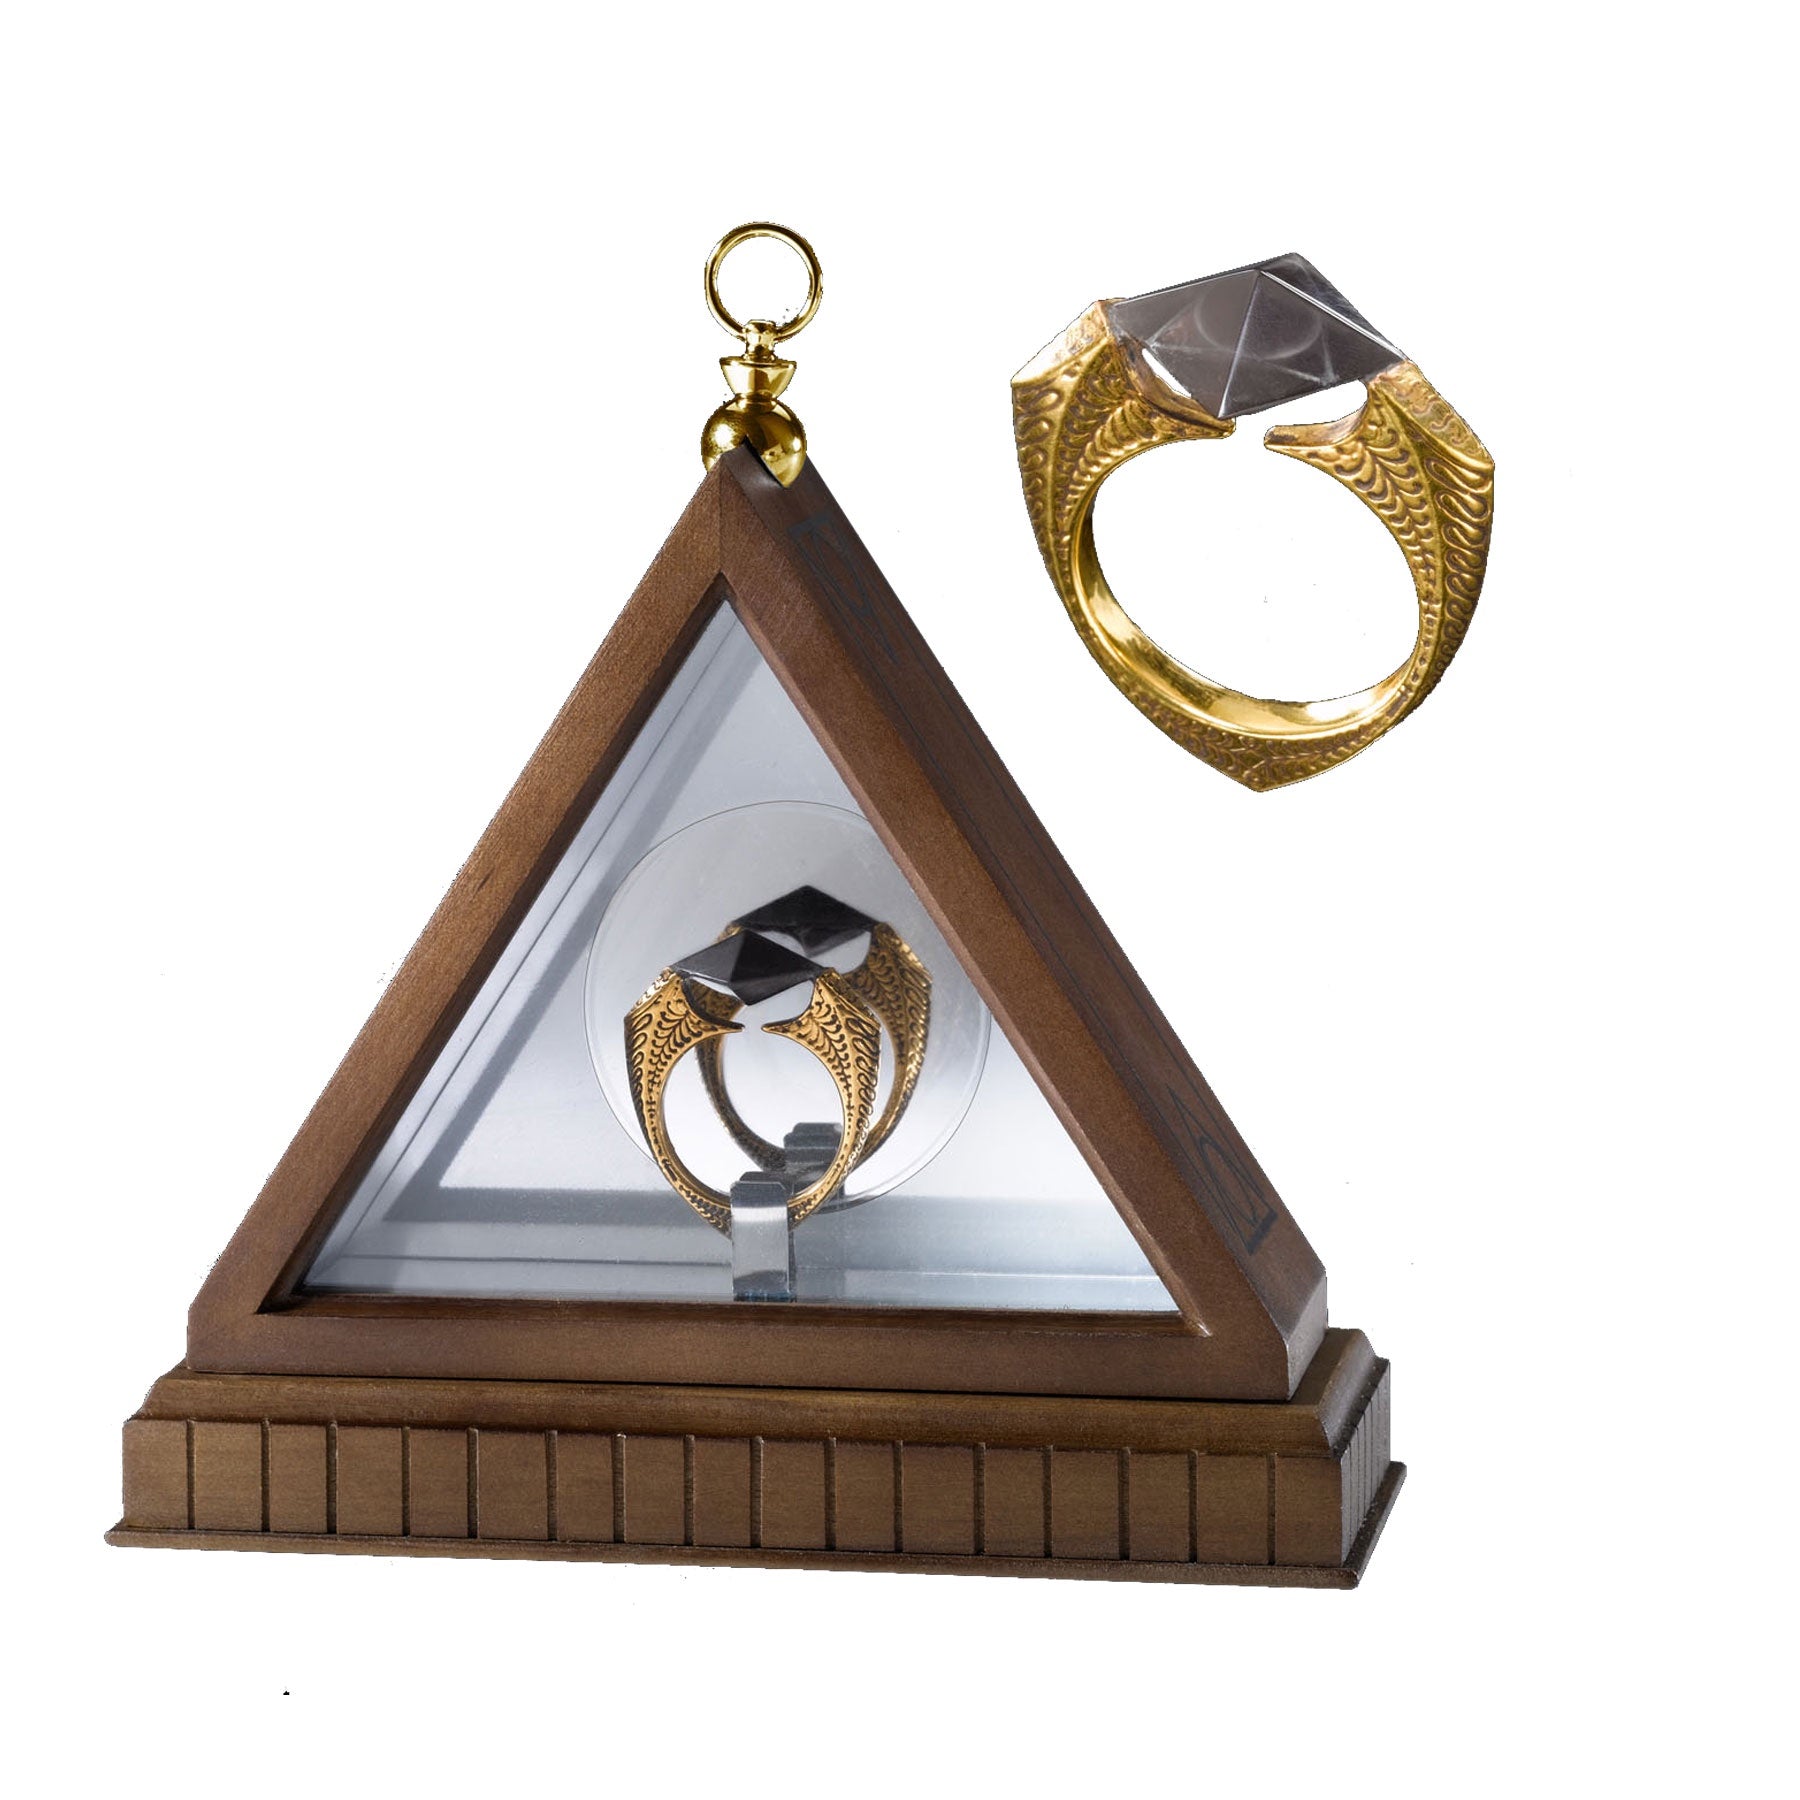 The Horcrux Ring